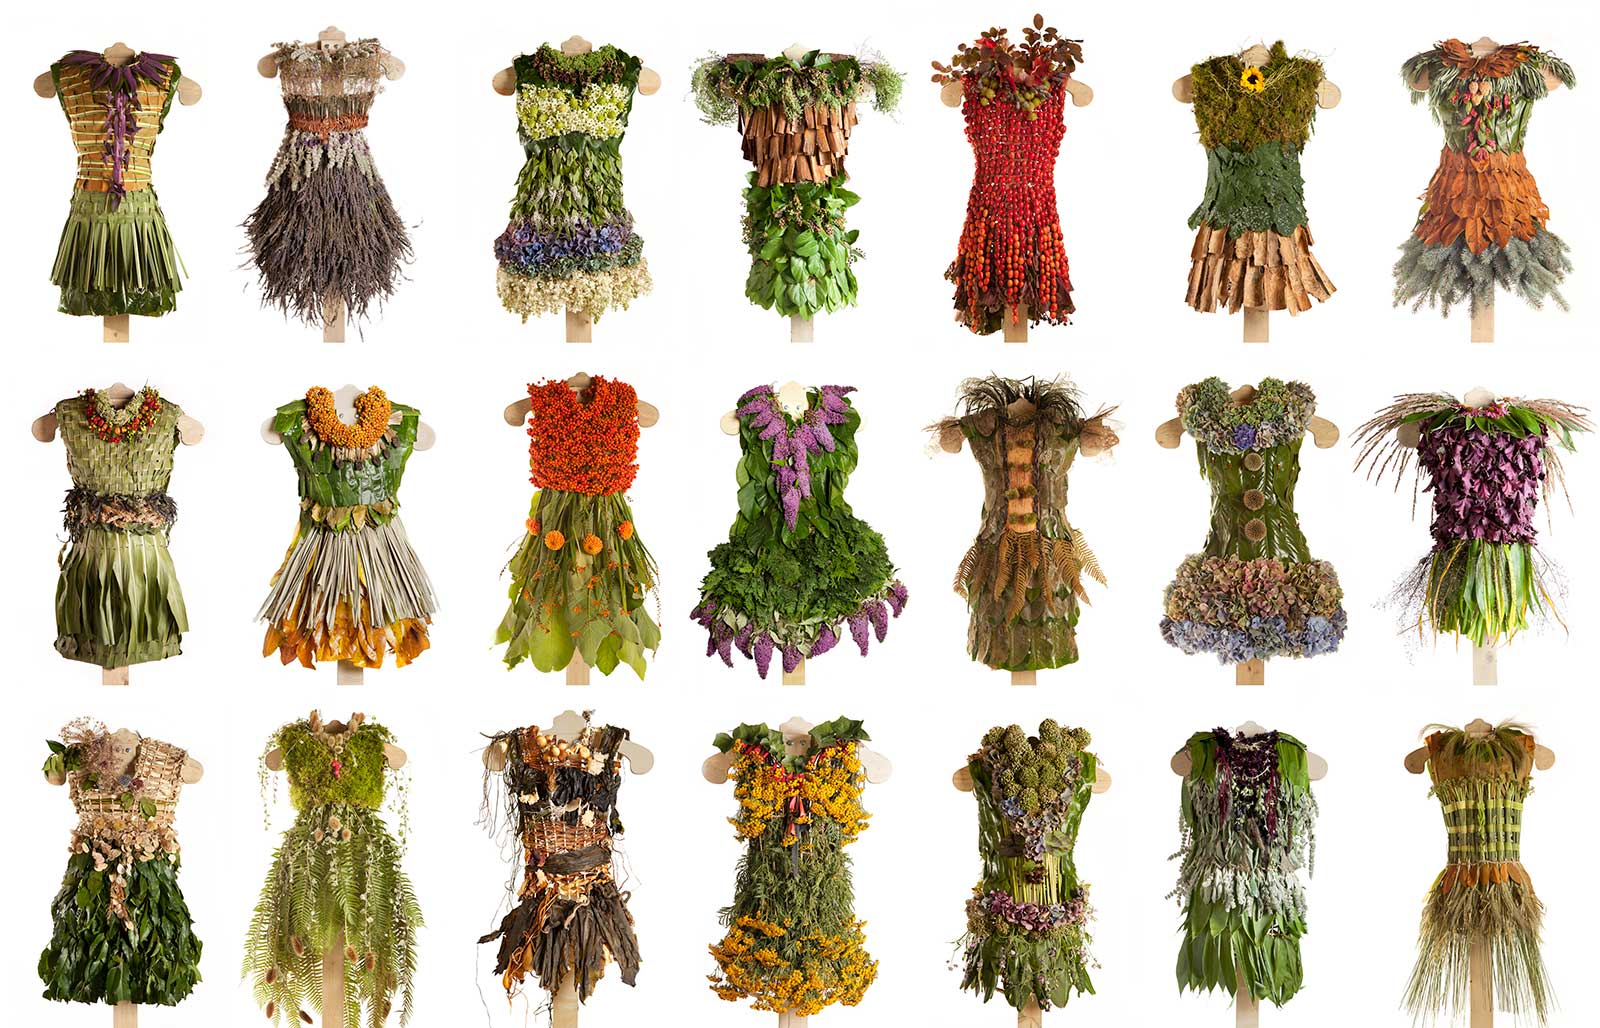 series of dresses made from plants